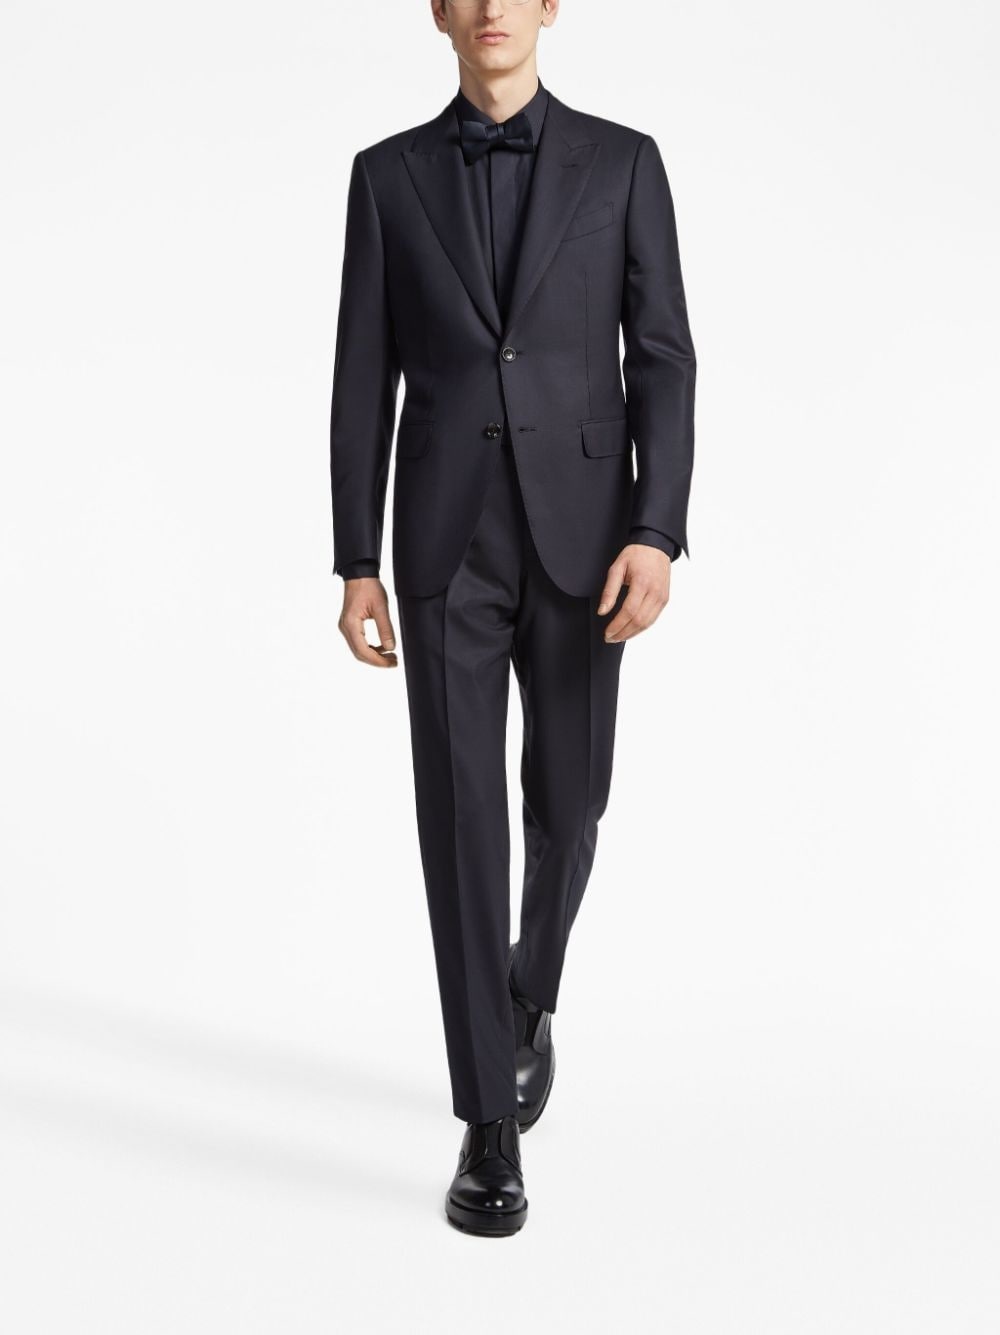 Centoventimila single-breasted wool suit - 2